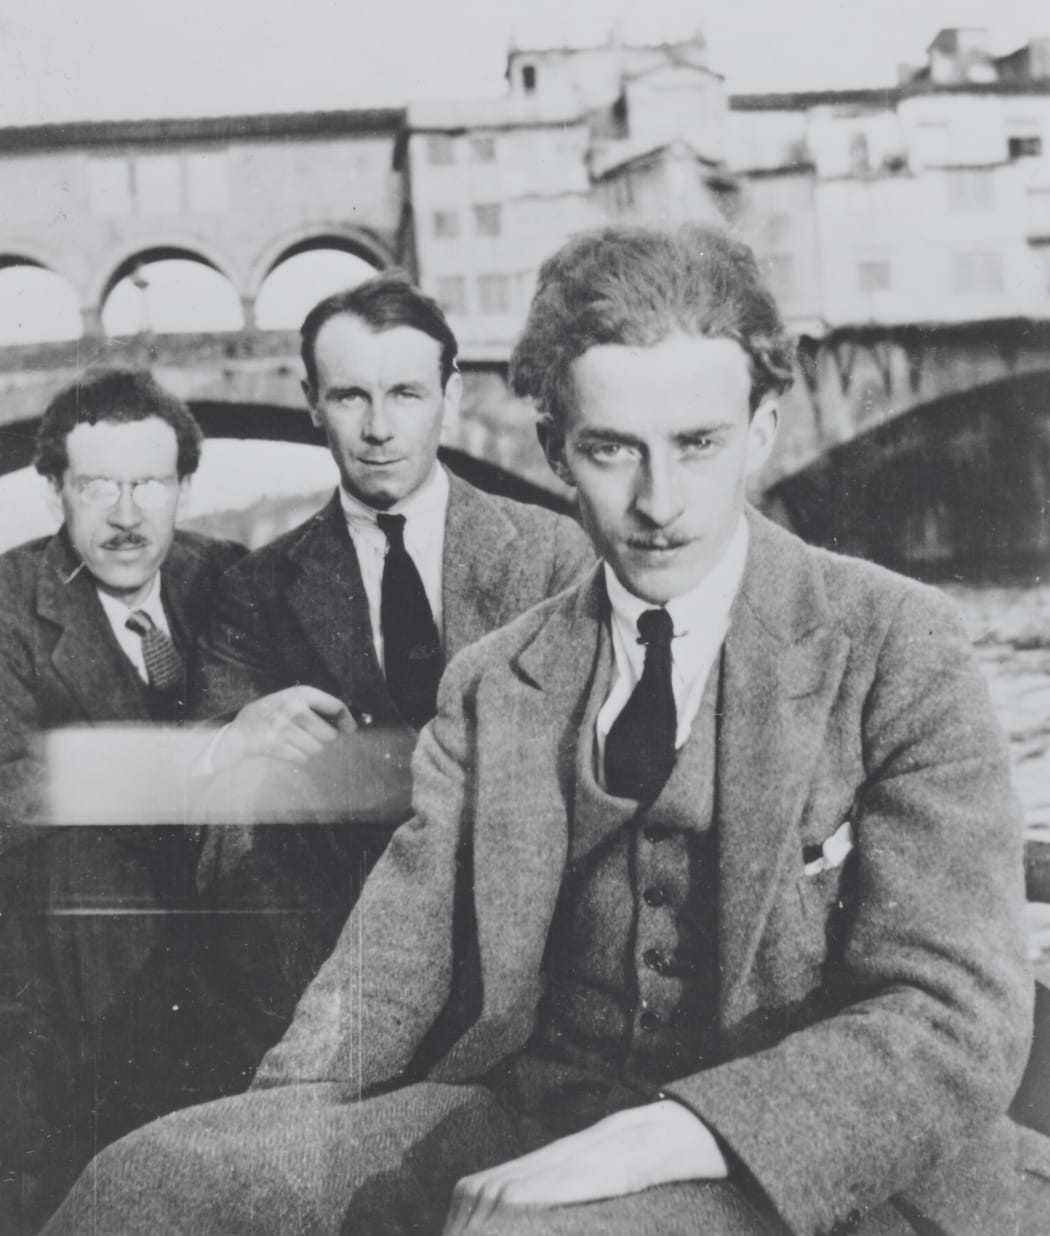 [L-R] William Crozier, William Geissler and William Gillies in Florence, 1924. Photo: National Galleries of Scotland.